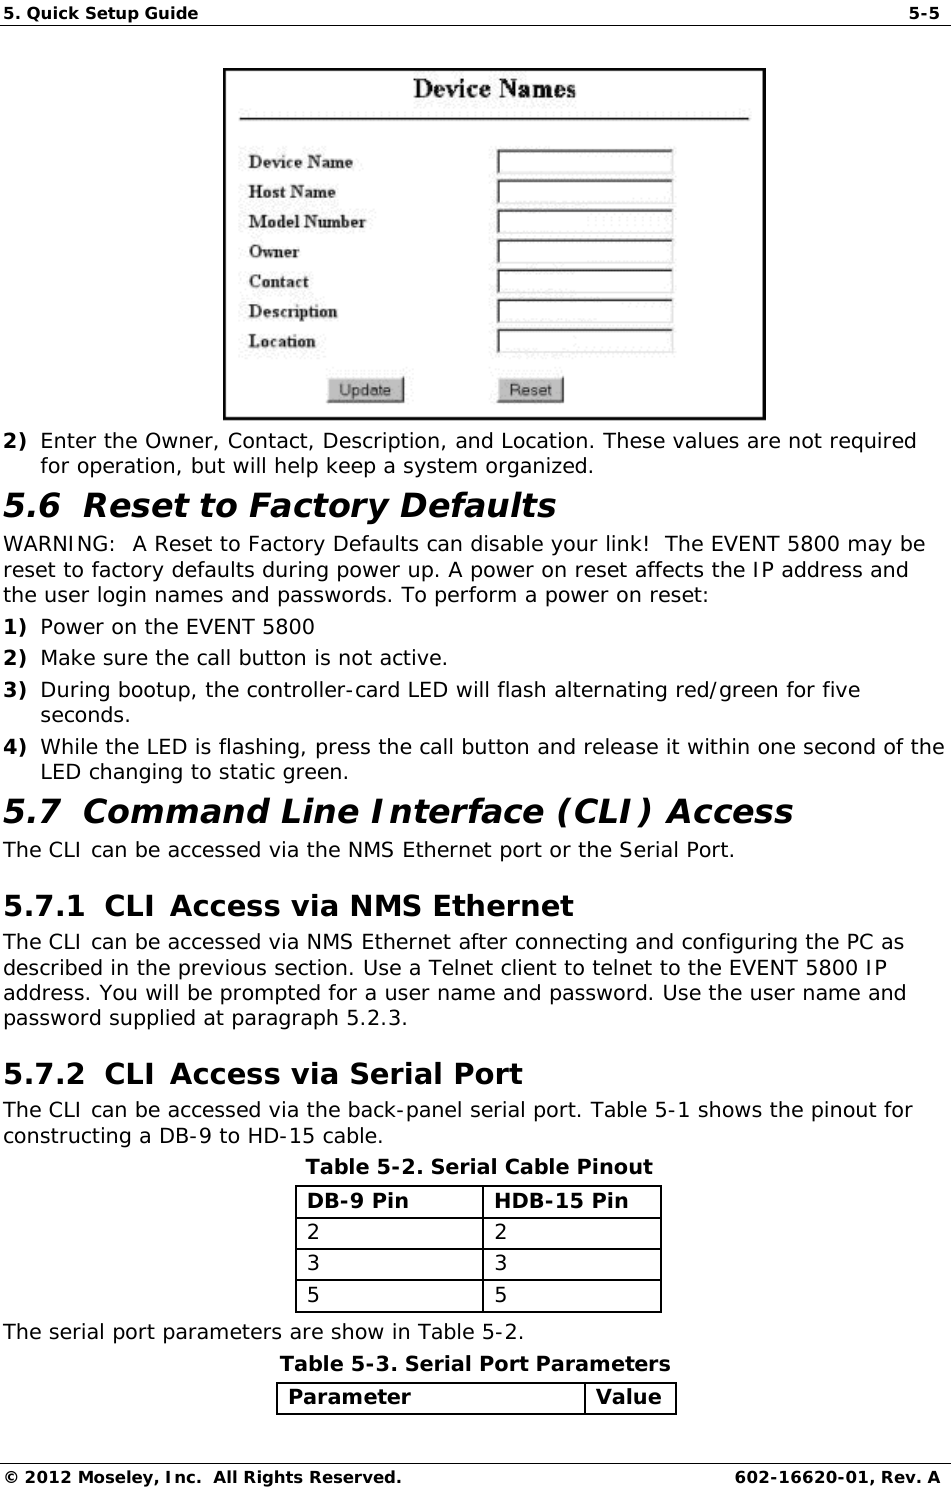 5. Quick Setup Guide   5-5 © 2012 Moseley, Inc.  All Rights Reserved.  602-16620-01, Rev. A  2) Enter the Owner, Contact, Description, and Location. These values are not required for operation, but will help keep a system organized. 5.6  Reset to Factory Defaults WARNING:  A Reset to Factory Defaults can disable your link!  The EVENT 5800 may be reset to factory defaults during power up. A power on reset affects the IP address and the user login names and passwords. To perform a power on reset: 1) Power on the EVENT 5800 2) Make sure the call button is not active. 3) During bootup, the controller-card LED will flash alternating red/green for five seconds. 4) While the LED is flashing, press the call button and release it within one second of the LED changing to static green. 5.7  Command Line Interface (CLI) Access The CLI can be accessed via the NMS Ethernet port or the Serial Port. 5.7.1  CLI Access via NMS Ethernet  The CLI can be accessed via NMS Ethernet after connecting and configuring the PC as described in the previous section. Use a Telnet client to telnet to the EVENT 5800 IP address. You will be prompted for a user name and password. Use the user name and password supplied at paragraph 5.2.3.  5.7.2  CLI Access via Serial Port  The CLI can be accessed via the back-panel serial port. Table 5-1 shows the pinout for constructing a DB-9 to HD-15 cable.   Table 5-2. Serial Cable Pinout  DB-9 Pin   HDB-15 Pin  2   2  3   3  5   5  The serial port parameters are show in Table 5-2.  Table 5-3. Serial Port Parameters  Parameter   Value  